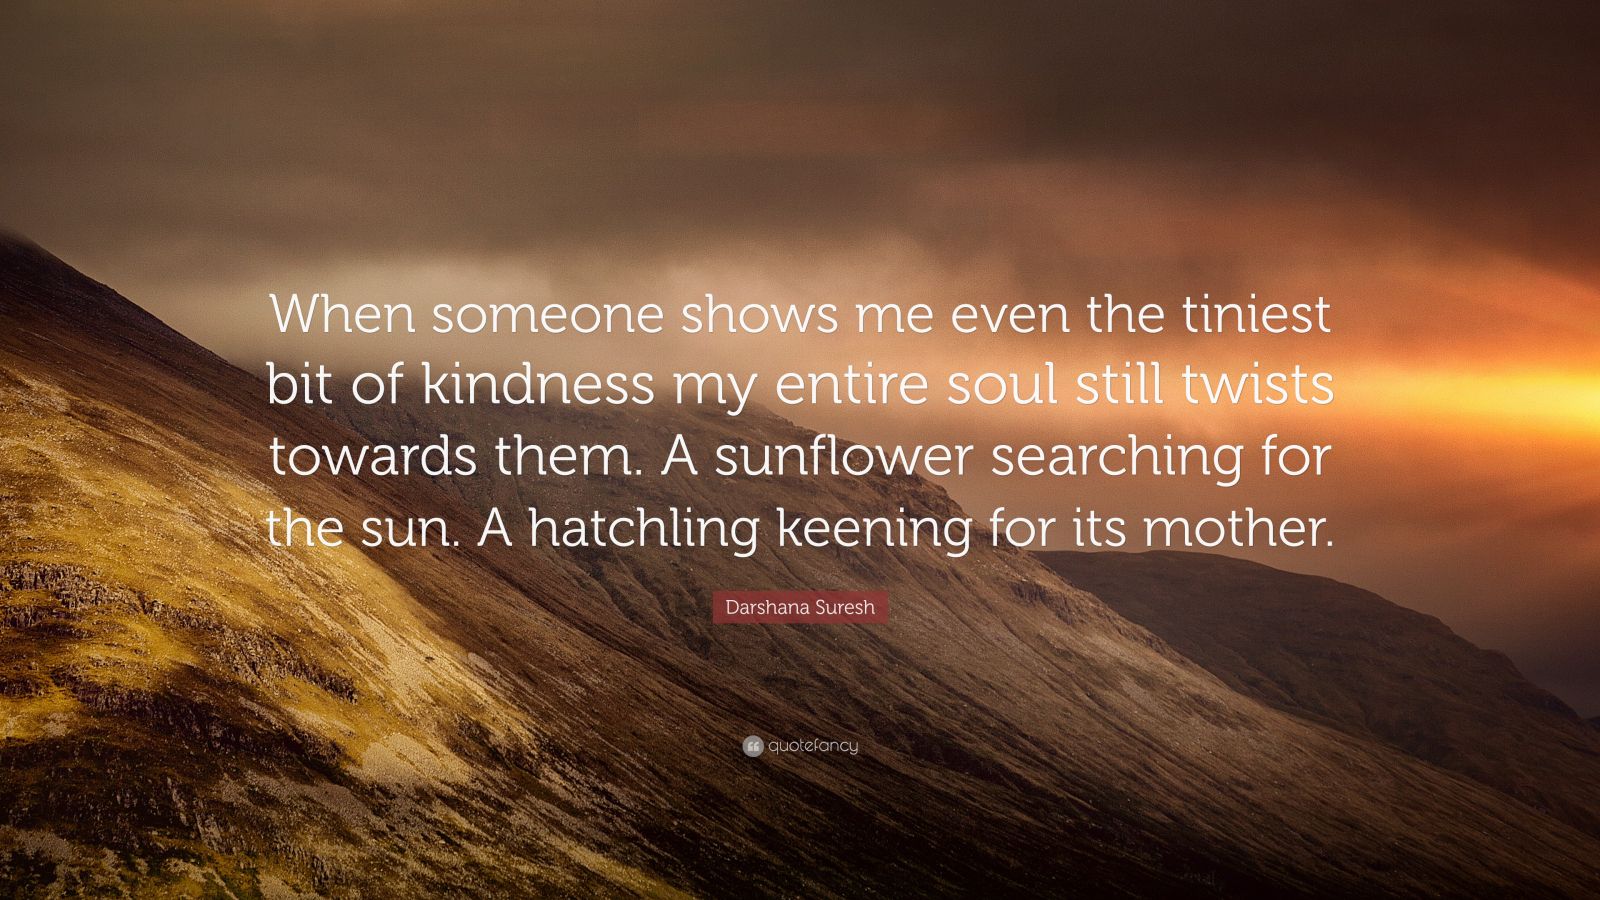 Darshana Suresh Quote: “When someone shows me even the tiniest bit of ...